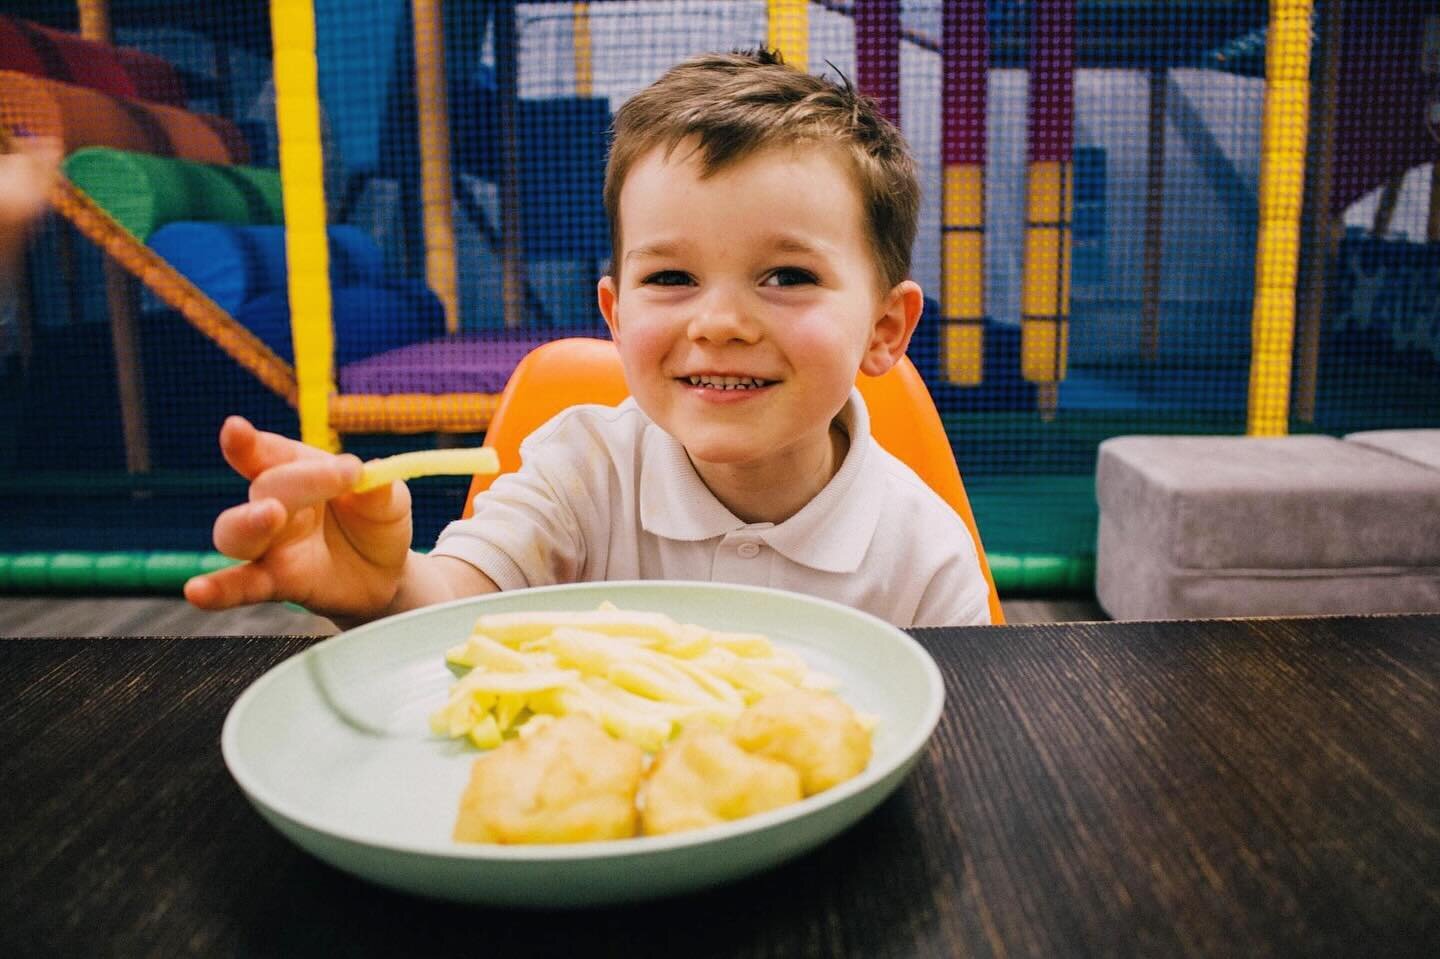 ✨ We love having your littles ones come for play &amp; food here at Happy Days! 🥳 We&rsquo;re open 9:30-5 tuesday-saturday! No booking required! ✨